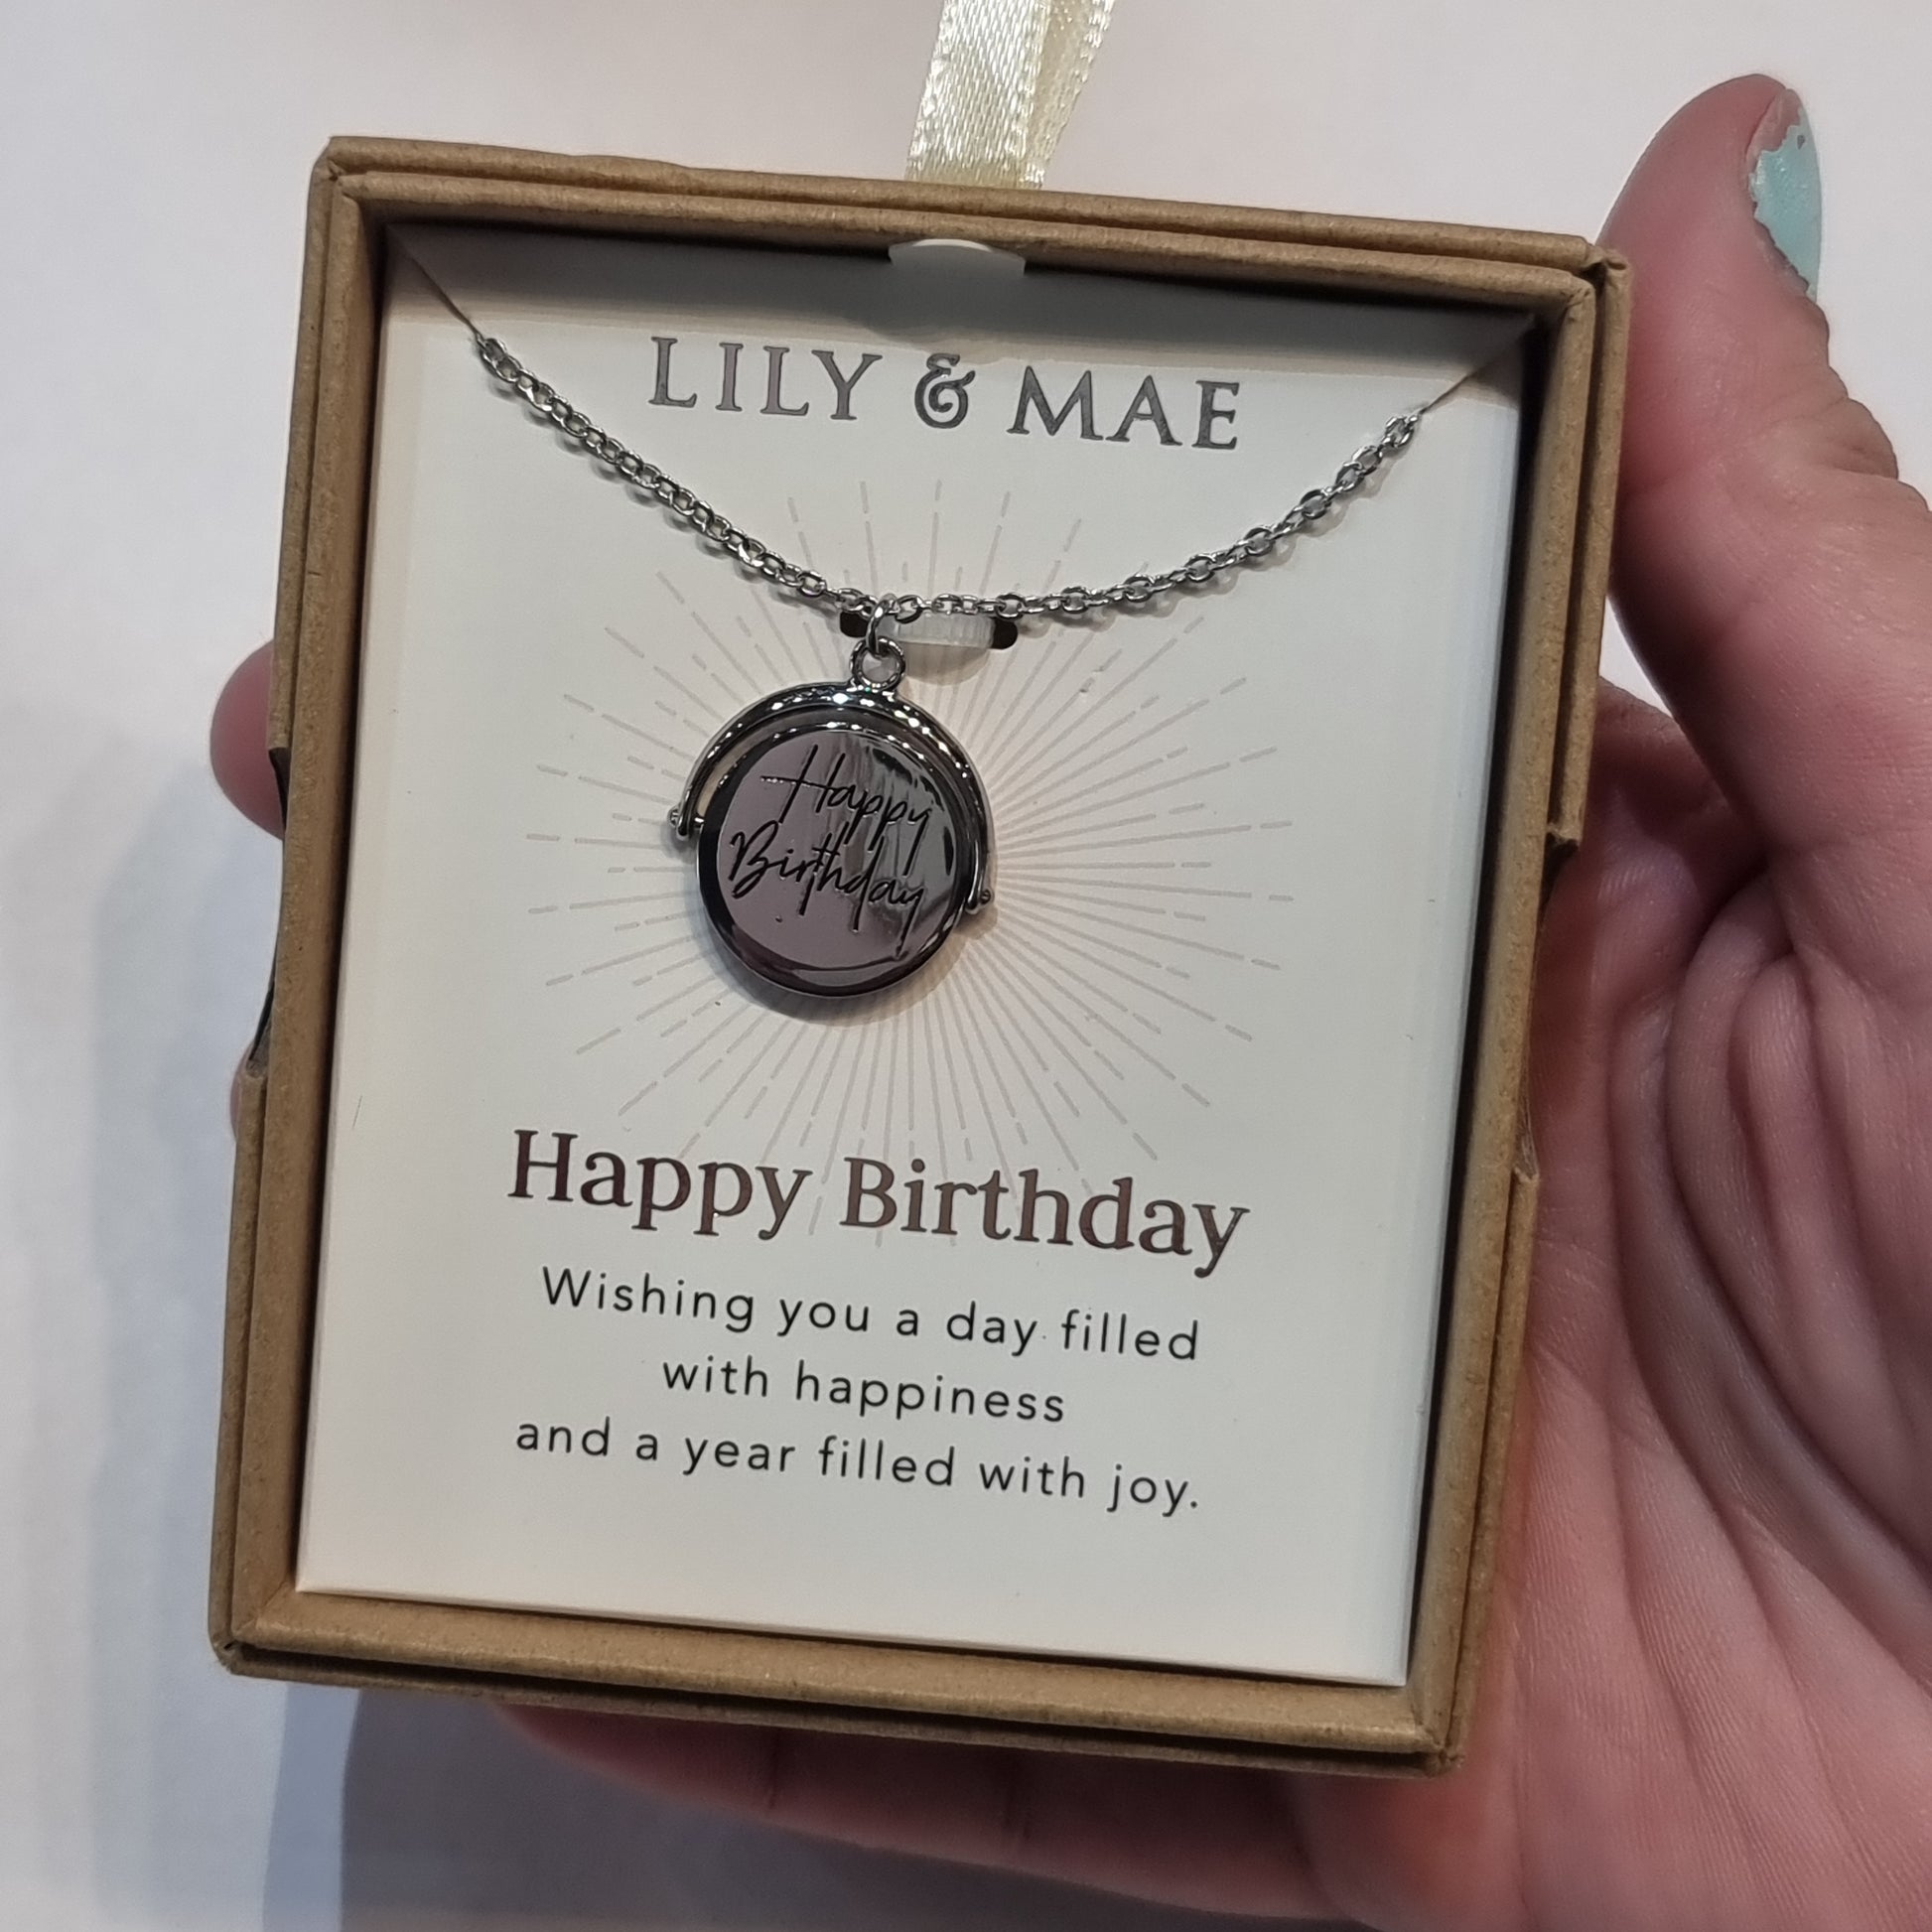 L&M spinning necklace - Happy Birthday - Rivendell Shop